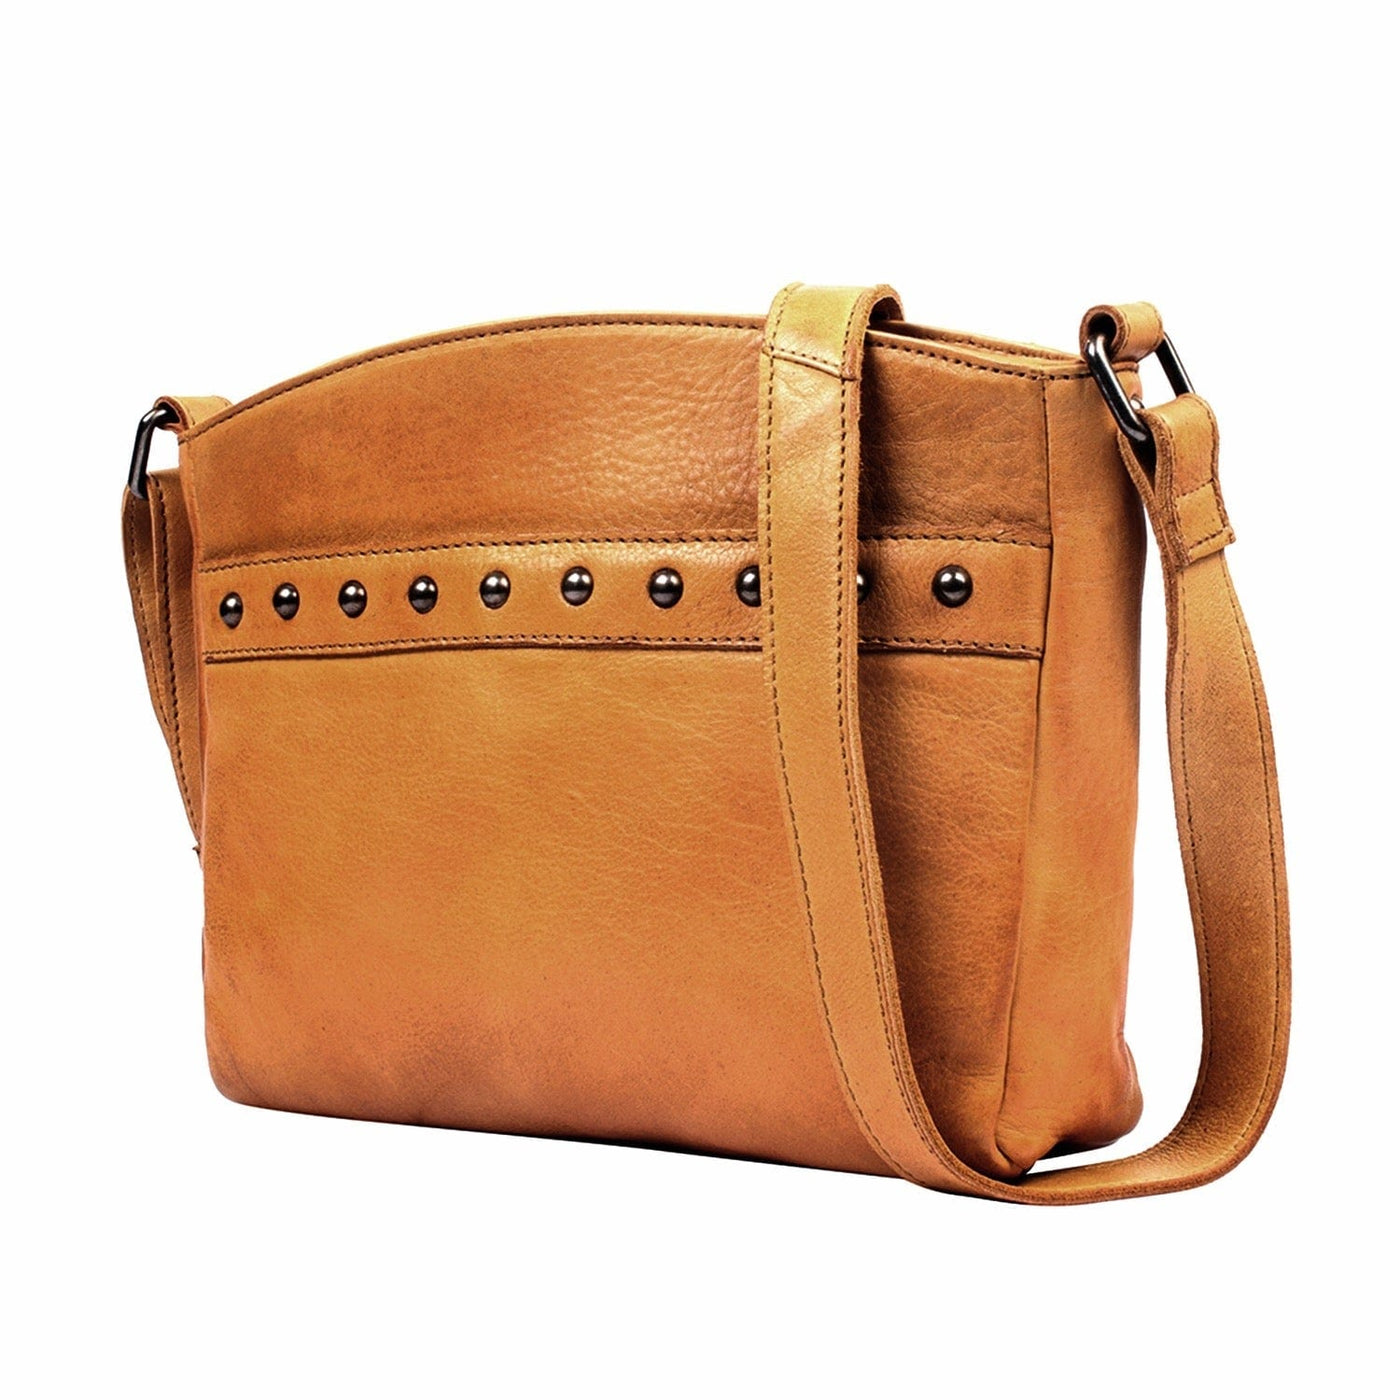 Conceal carry autumn crossbody bag by Lady Conceal - Locking YKK Conceal Carry Purse - Gun Purse - Bag for Gun with Locking Zippers - CCW bags - Purse for Pistol